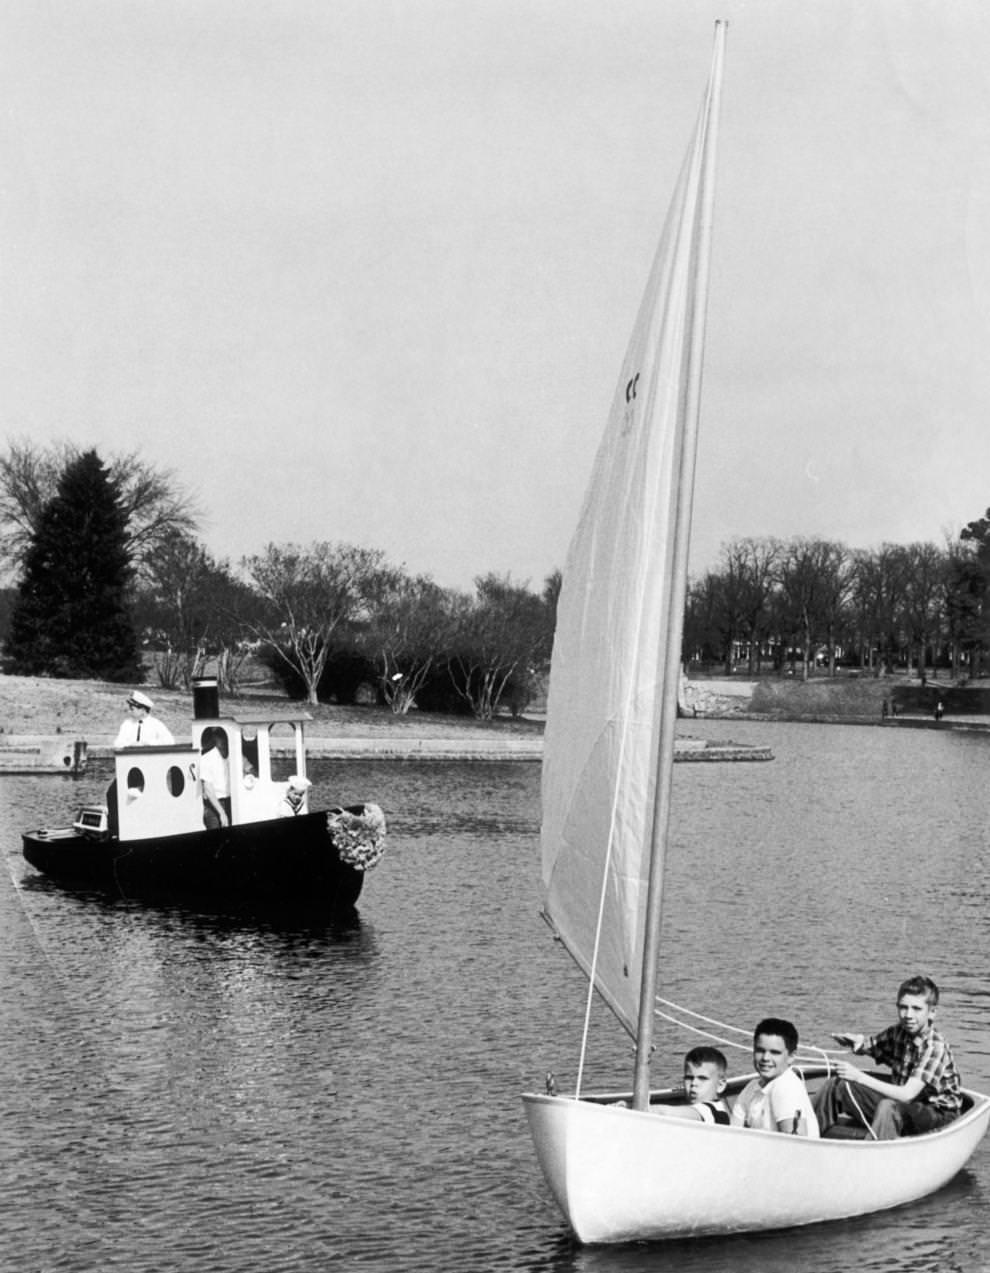 Richmond’s sixth annual Boat and Sports Show was on its way to the Arena, 1961.